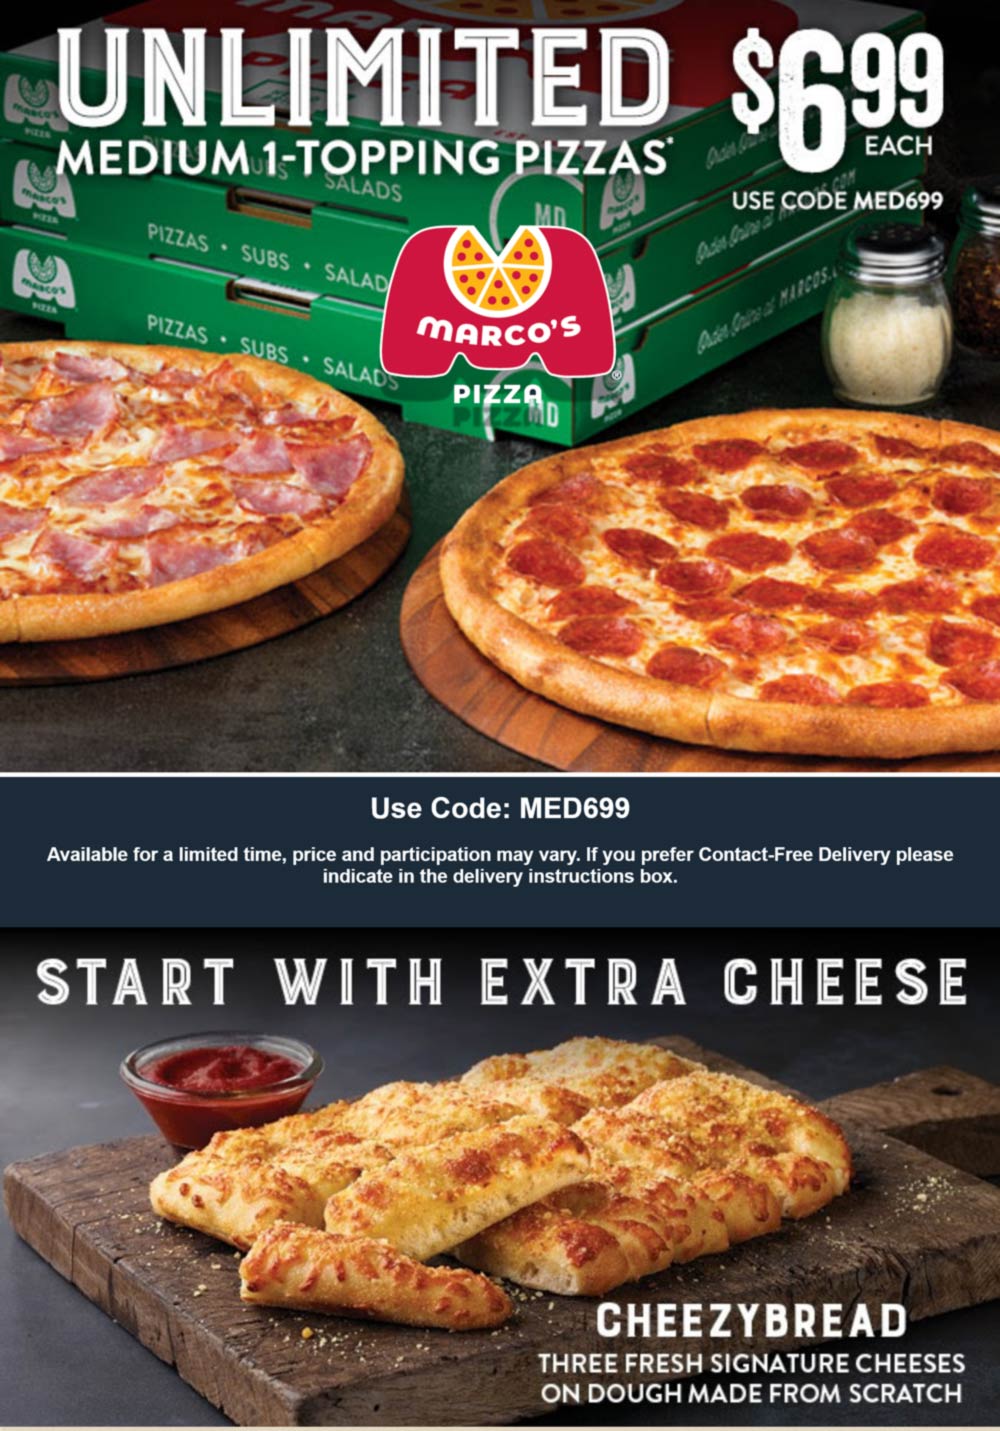 Marcos Pizza restaurants Coupon  Medium 1-topping pizzas for $7 at Marcos Pizza via promo code MED699 #marcospizza 